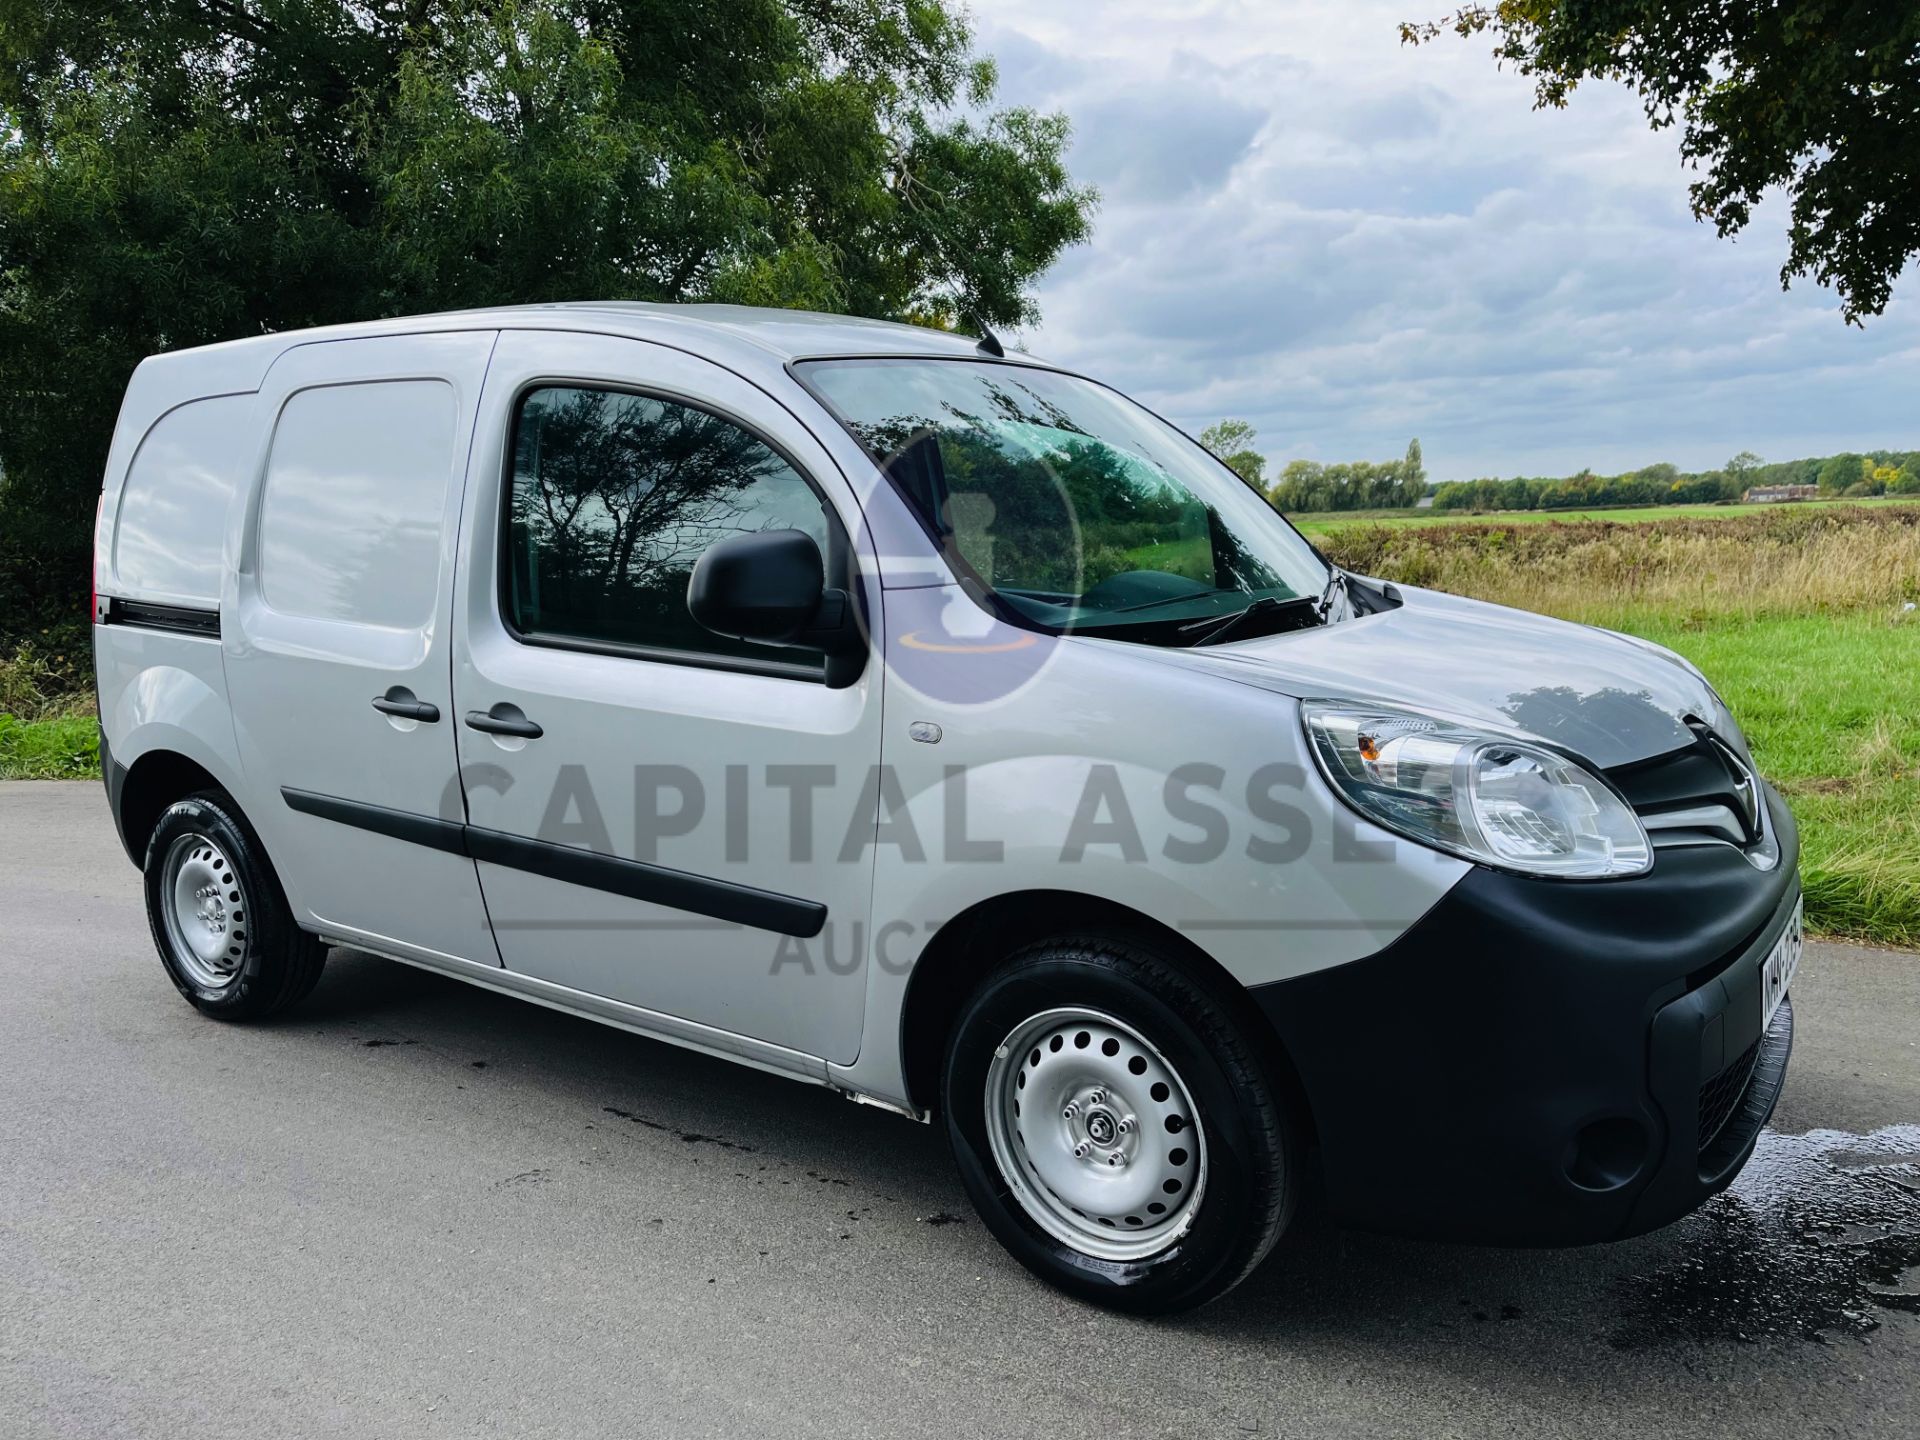 RENAULT KANGOO 1.5DCI "BUSINESS EDITION" 2018 -EURO 6/STOP START (AIR CON) ELEC PACK-TWIN SIDE DOORS - Image 6 of 21